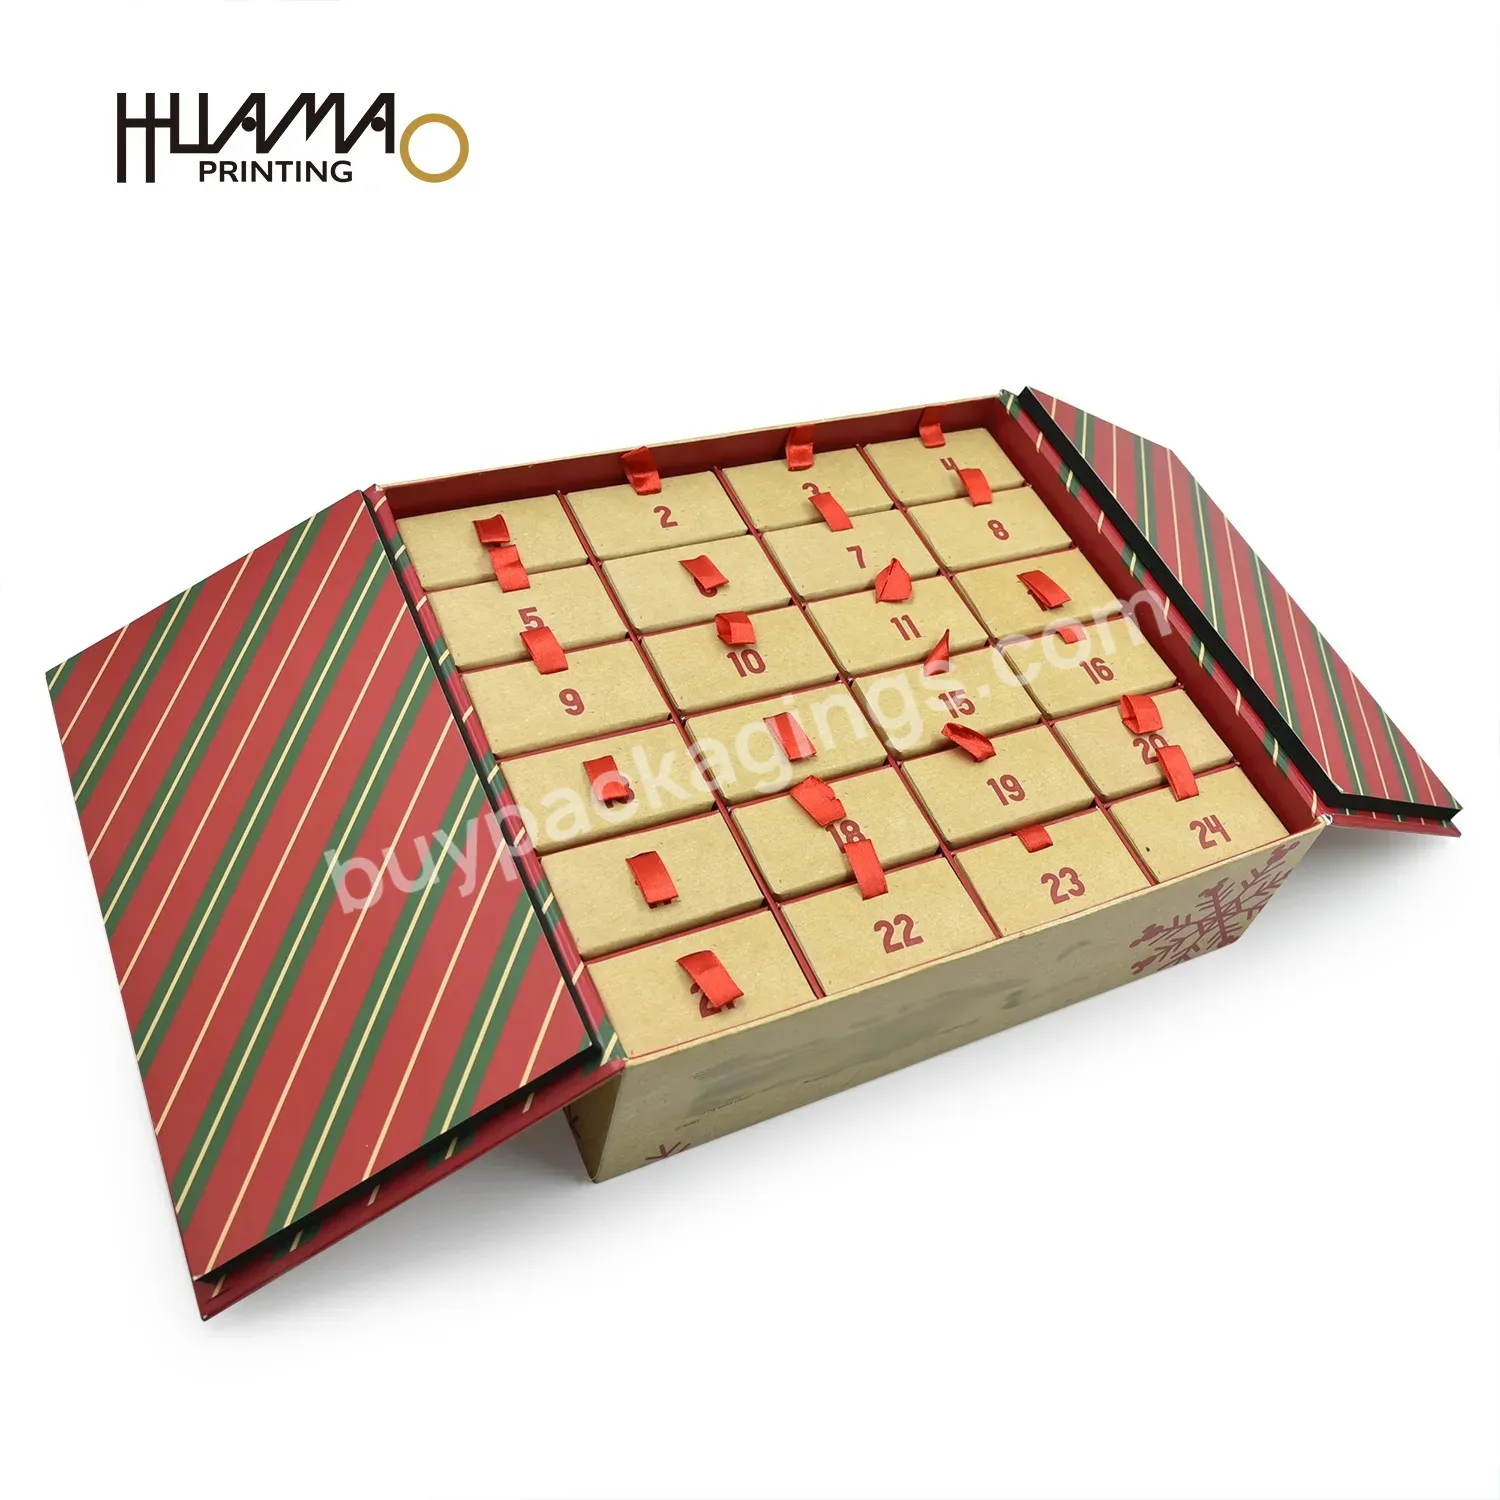 Corrugated Cardboard Envelope Cajas Collapsible Paper Container Foldbable Box Packaging Boite A Cupcakes Advent Calendar Box